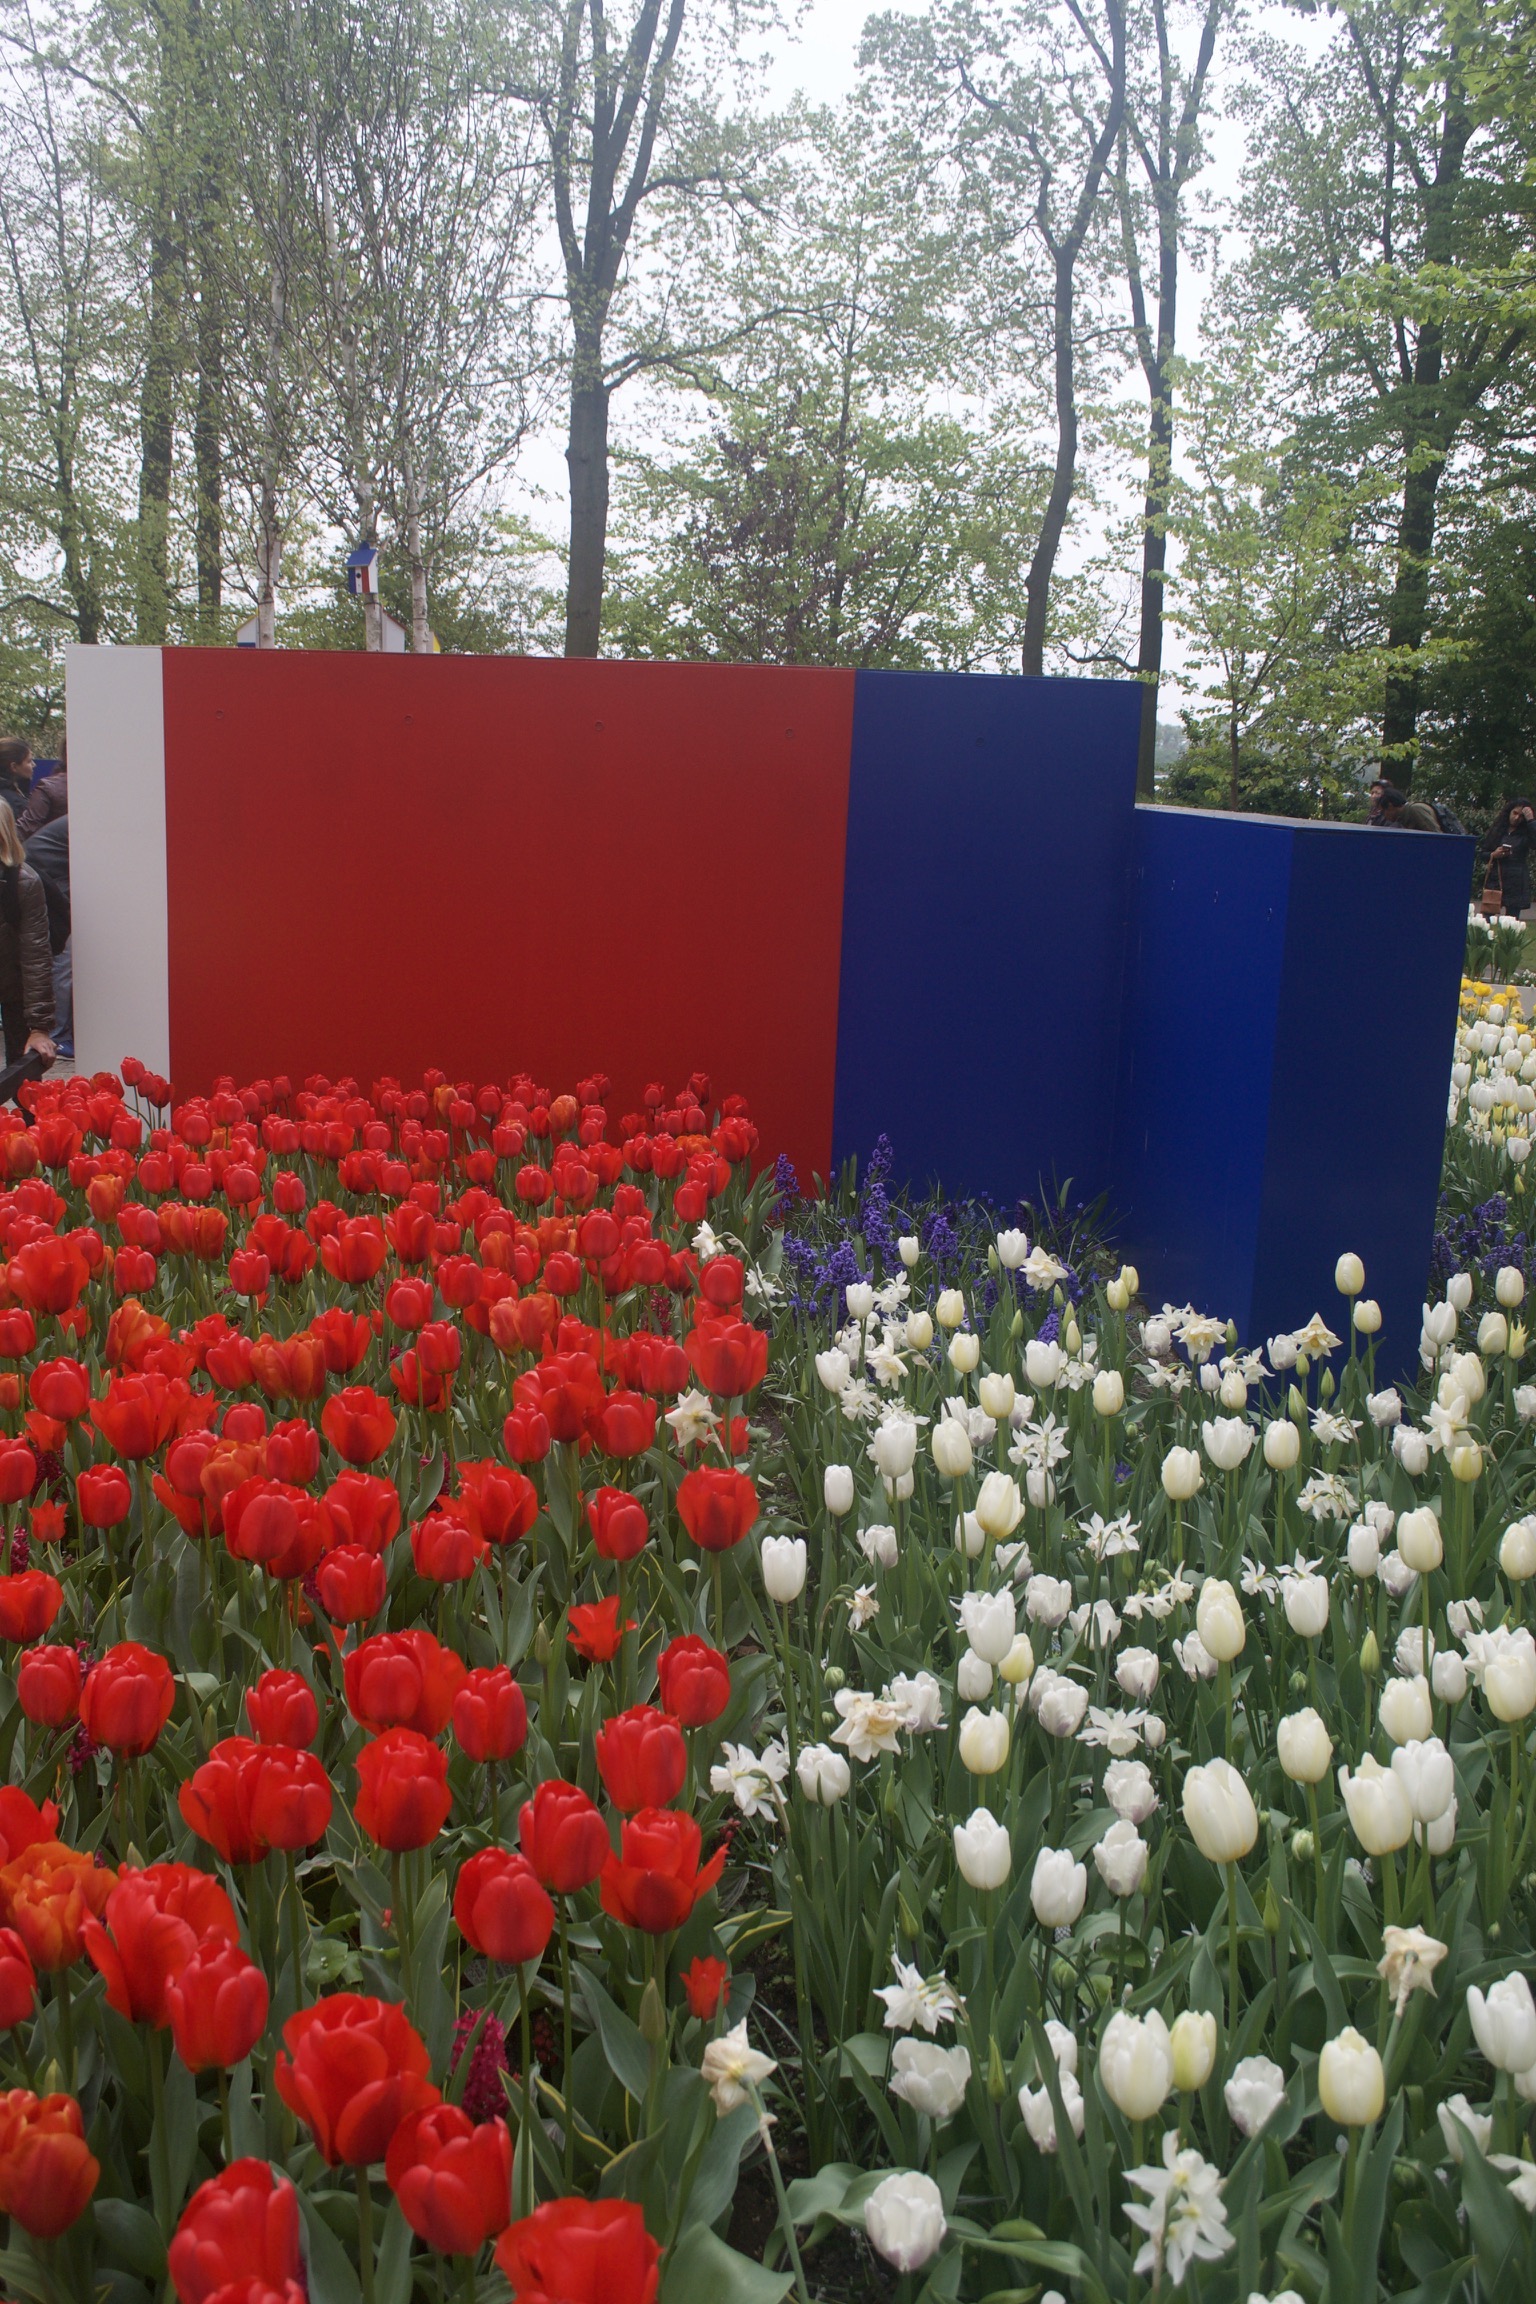 Tulips the colors of the flag of the Netherlands in front of a white, red, and blue abstract.